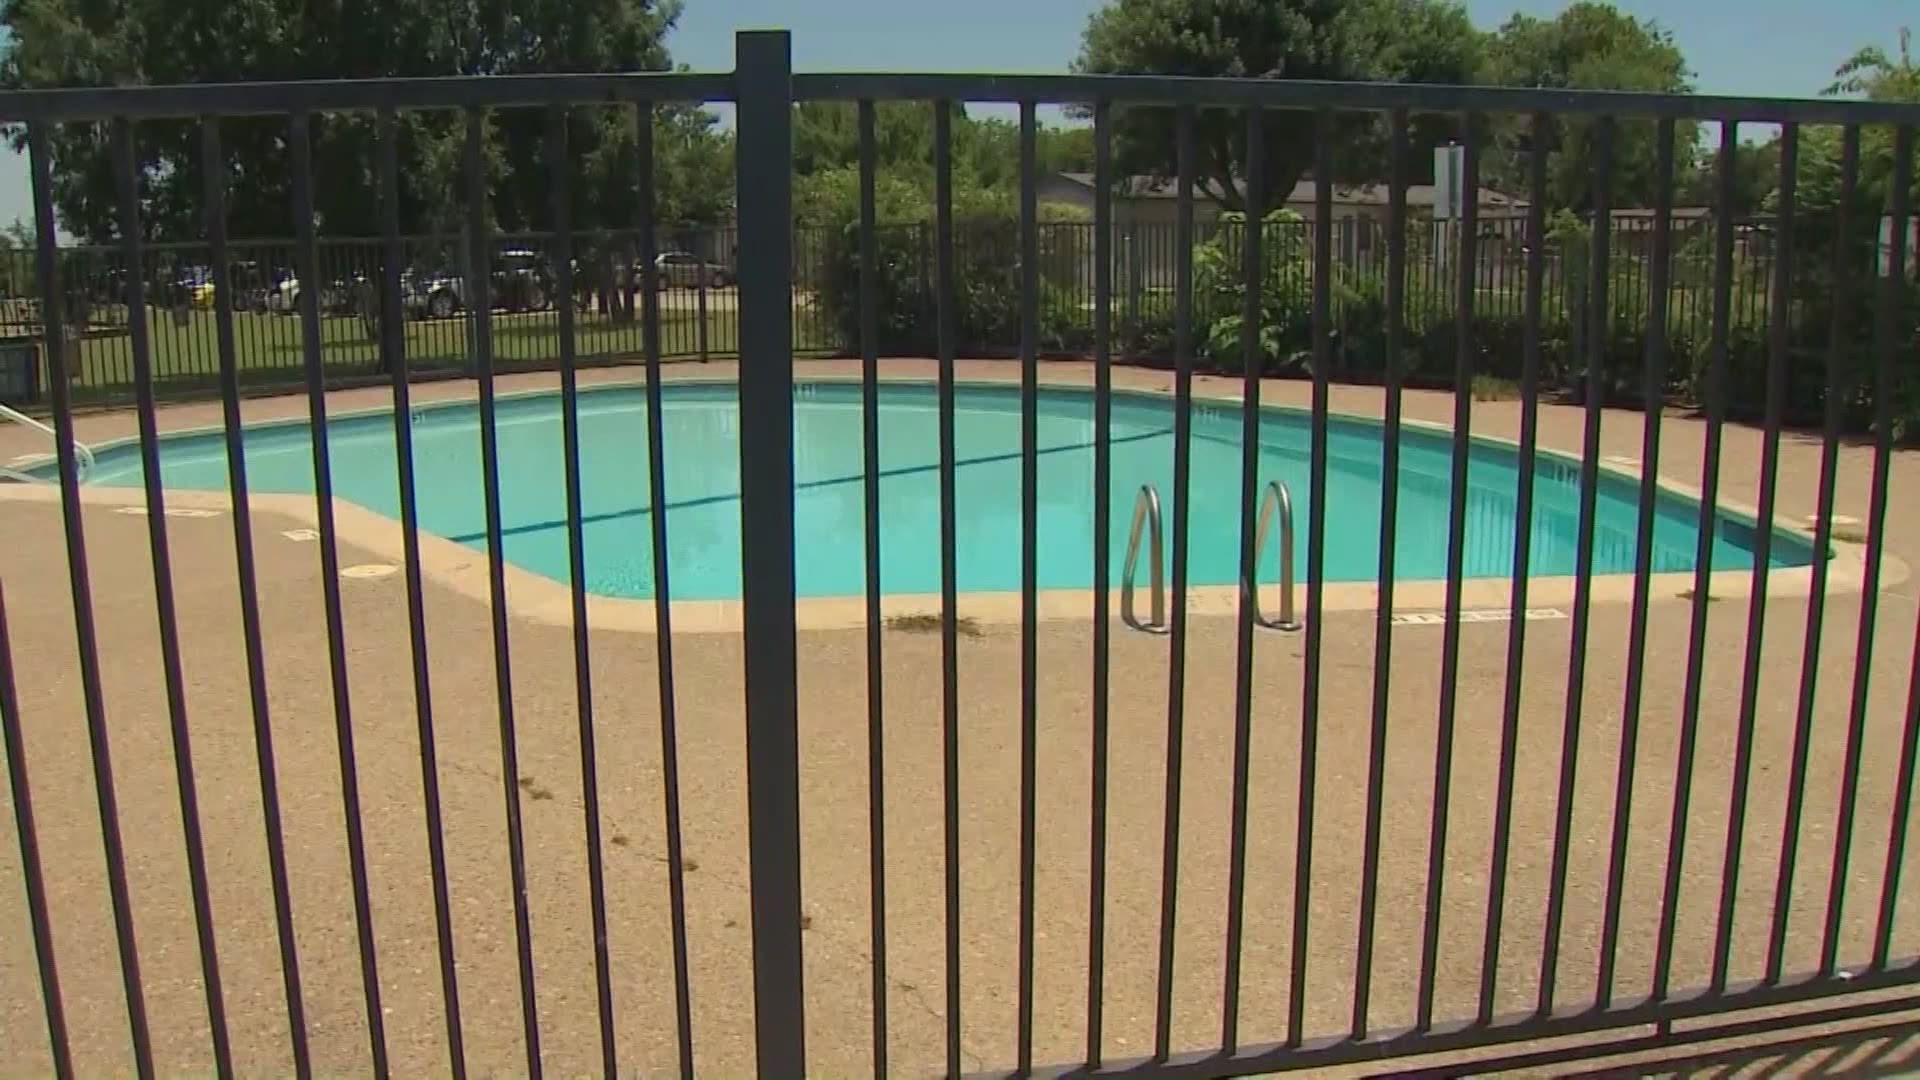 37 children in Texas have died from drowning this year so far; two were in the last 24 hours, the state says.